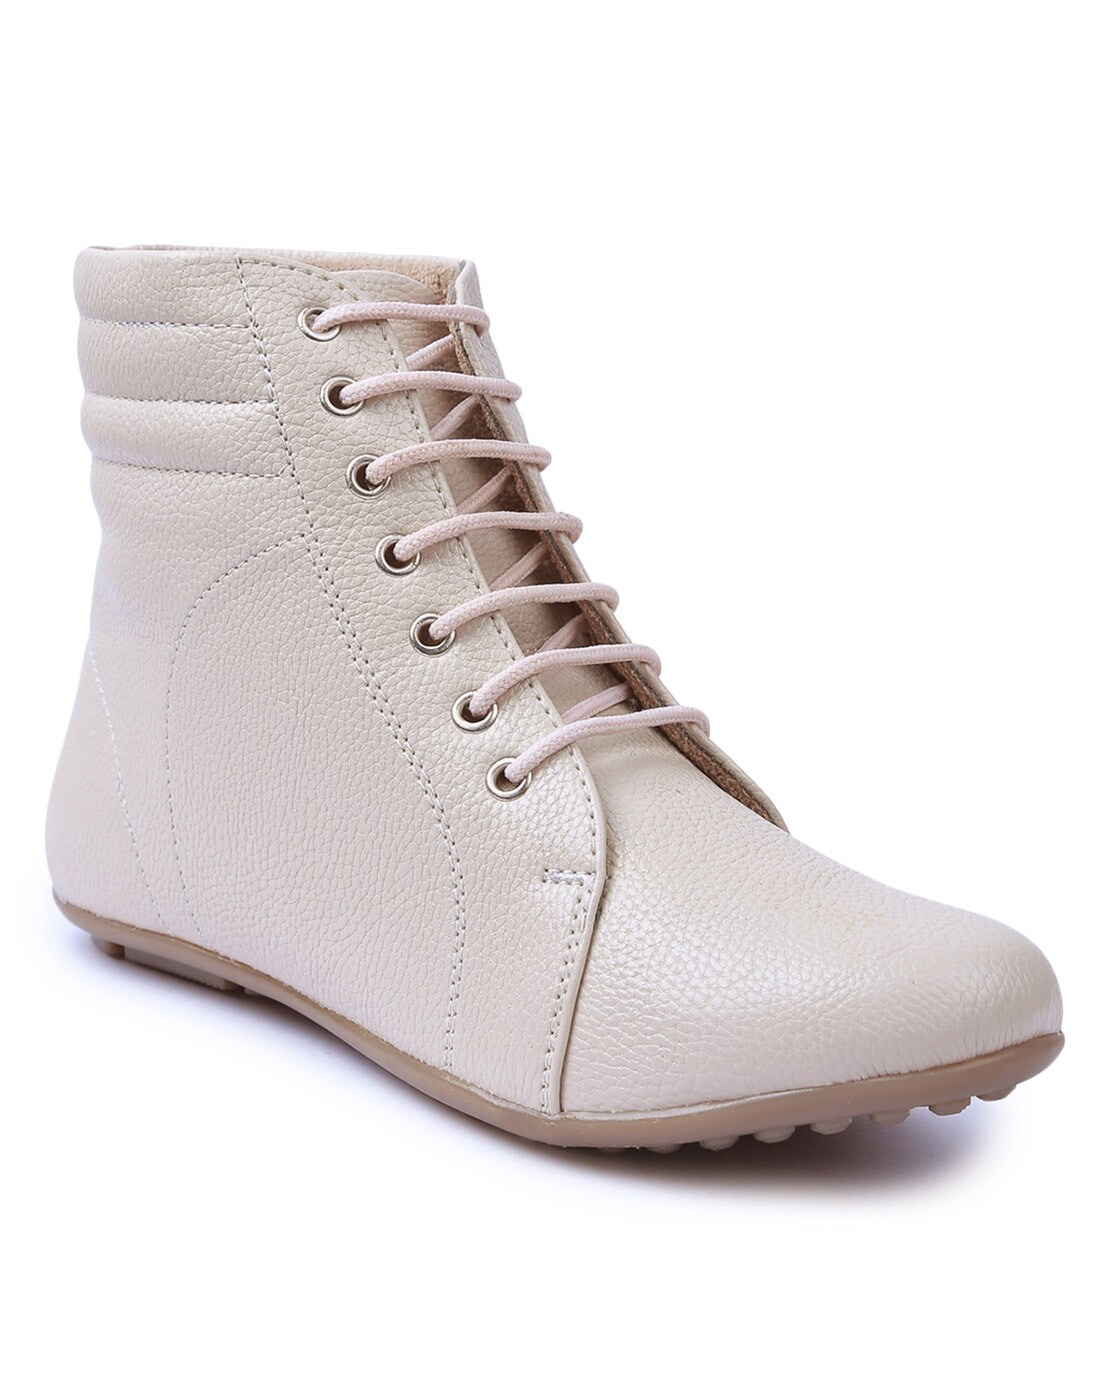 cream boots for women